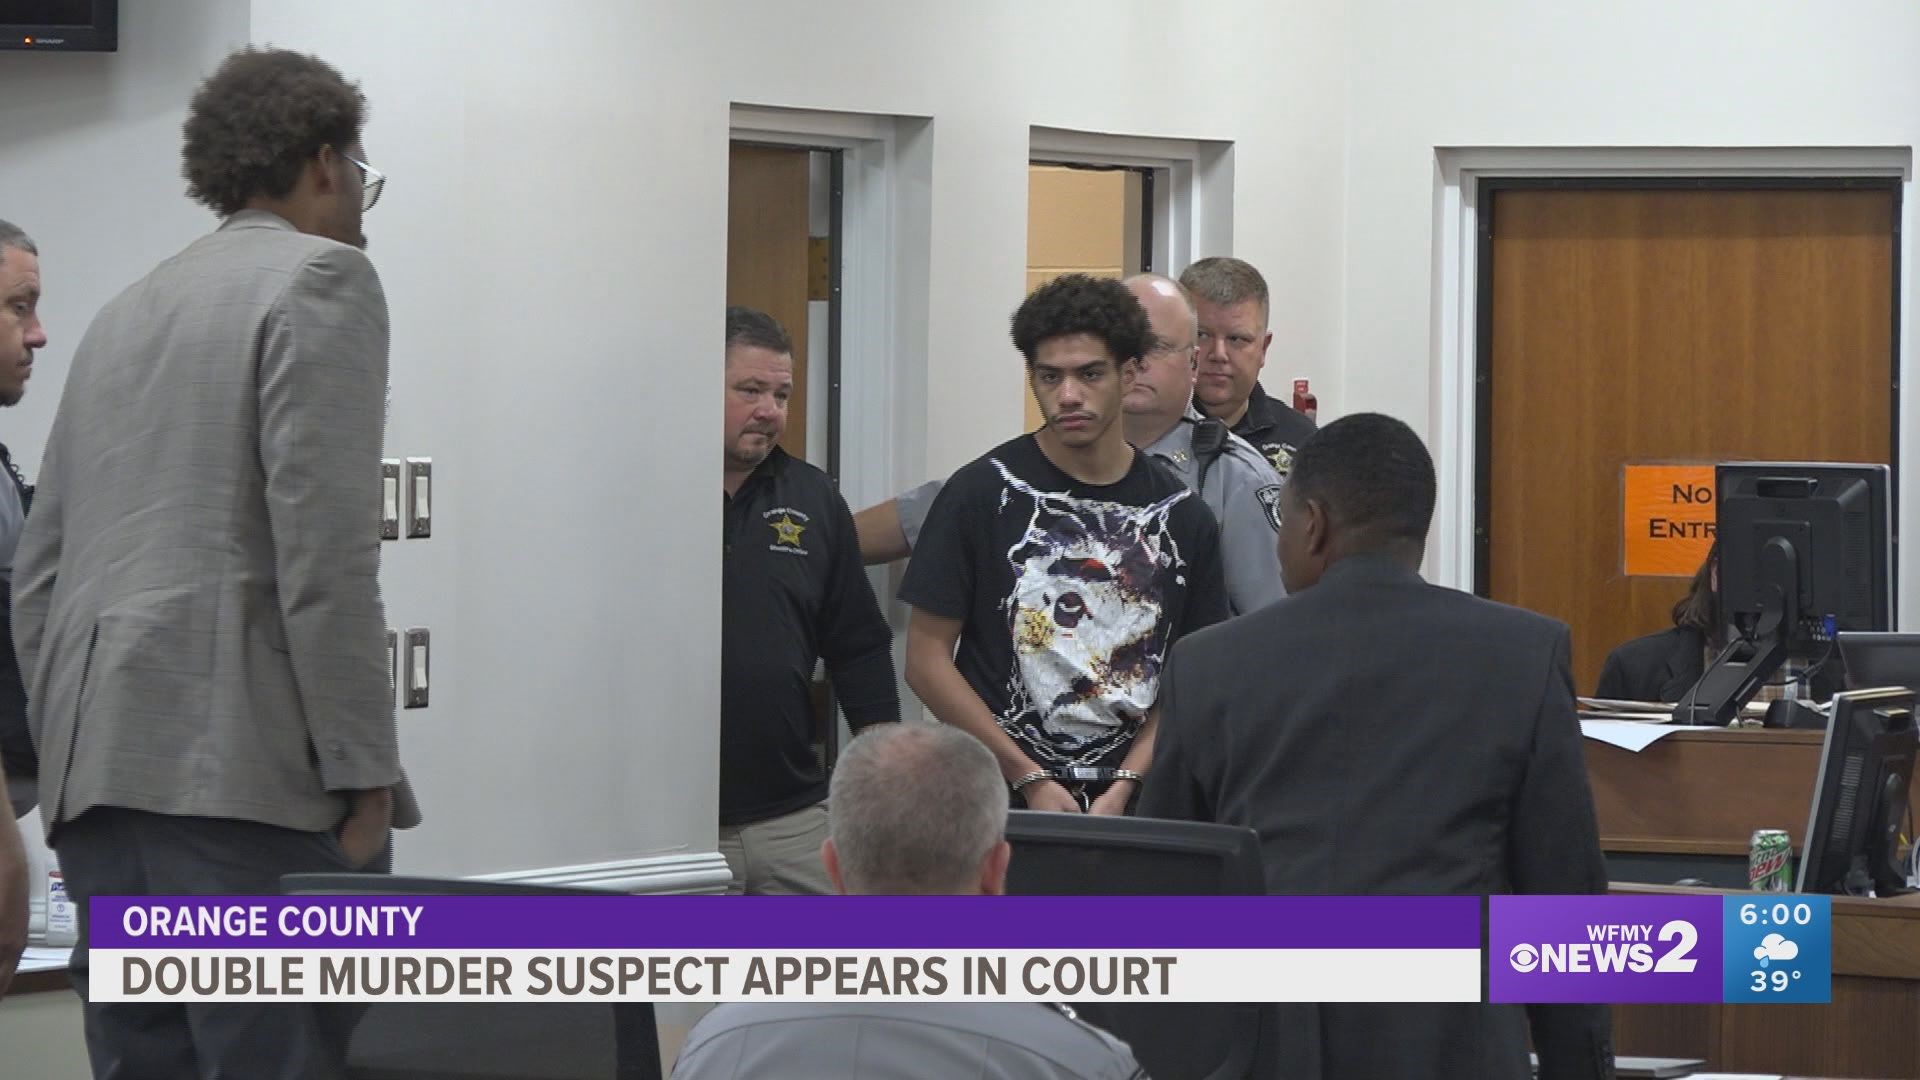 17-year-old Issiah Ross appeared in court. Family of the two victims were also in the court room.